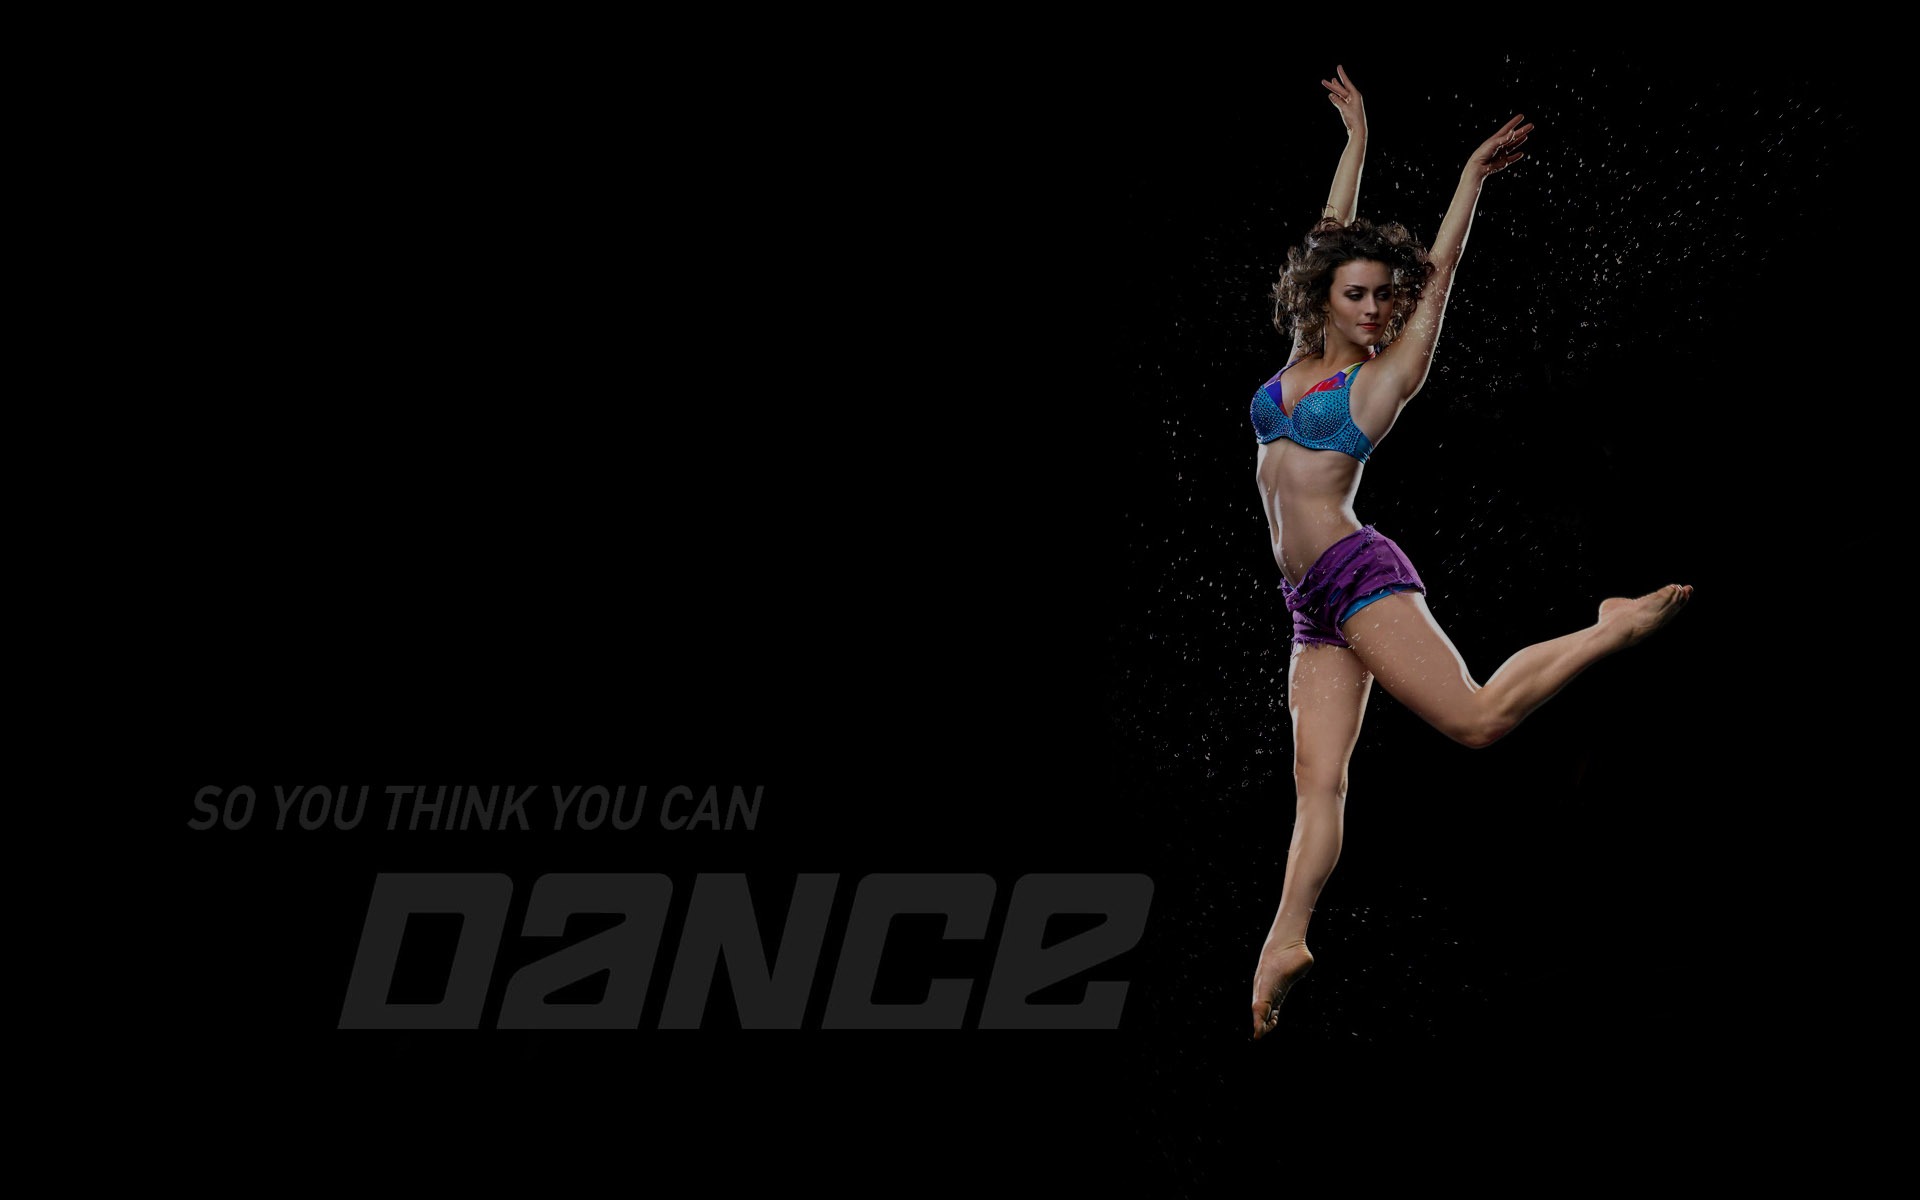 So You Think You Can Dance wallpaper (2) #5 - 1920x1200